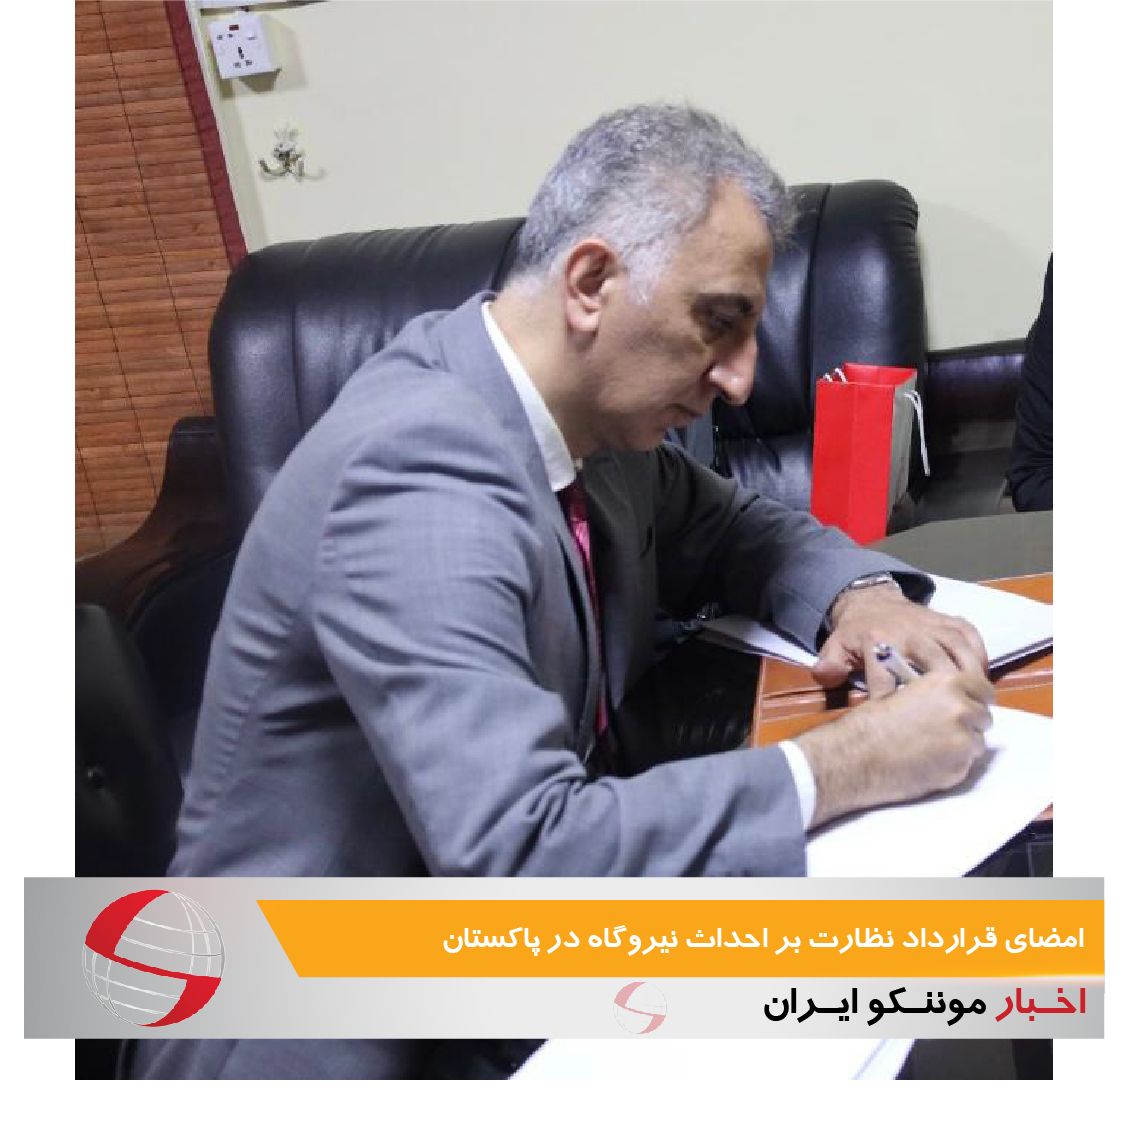 Signing the Contract of “Supervising the construction of a power plant in Pakistan”